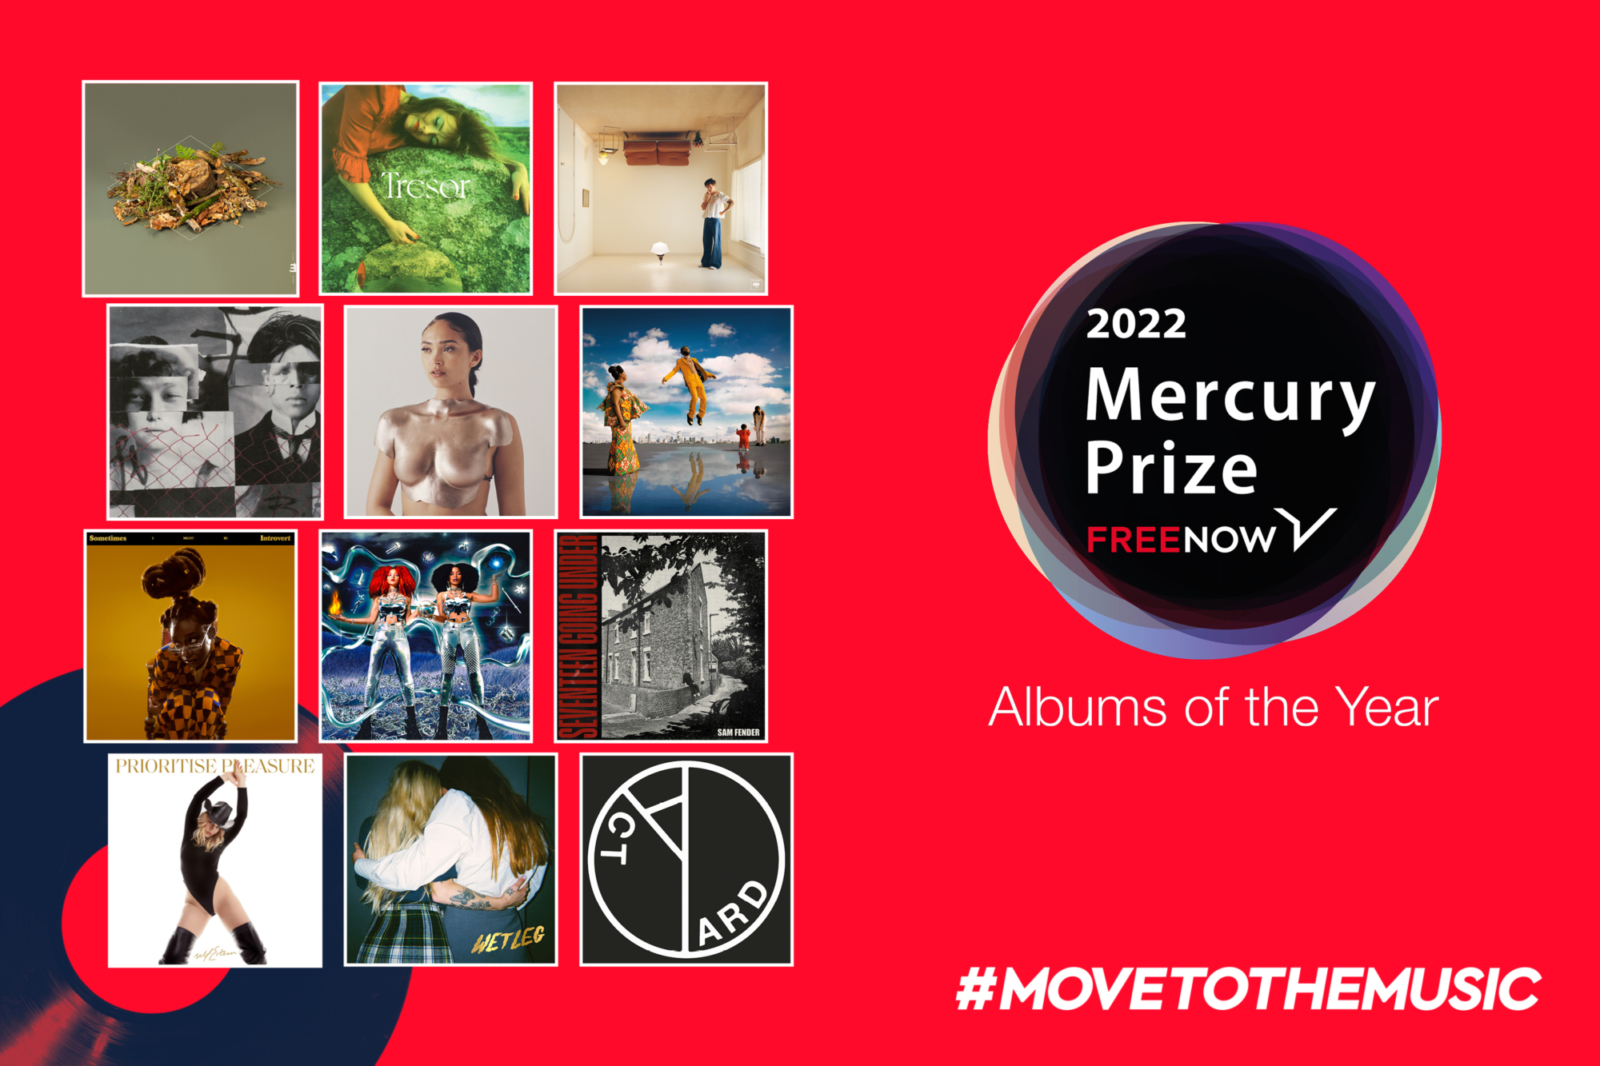 2022 Mercury Prize with FREE NOW announces rescheduled Awards Show date